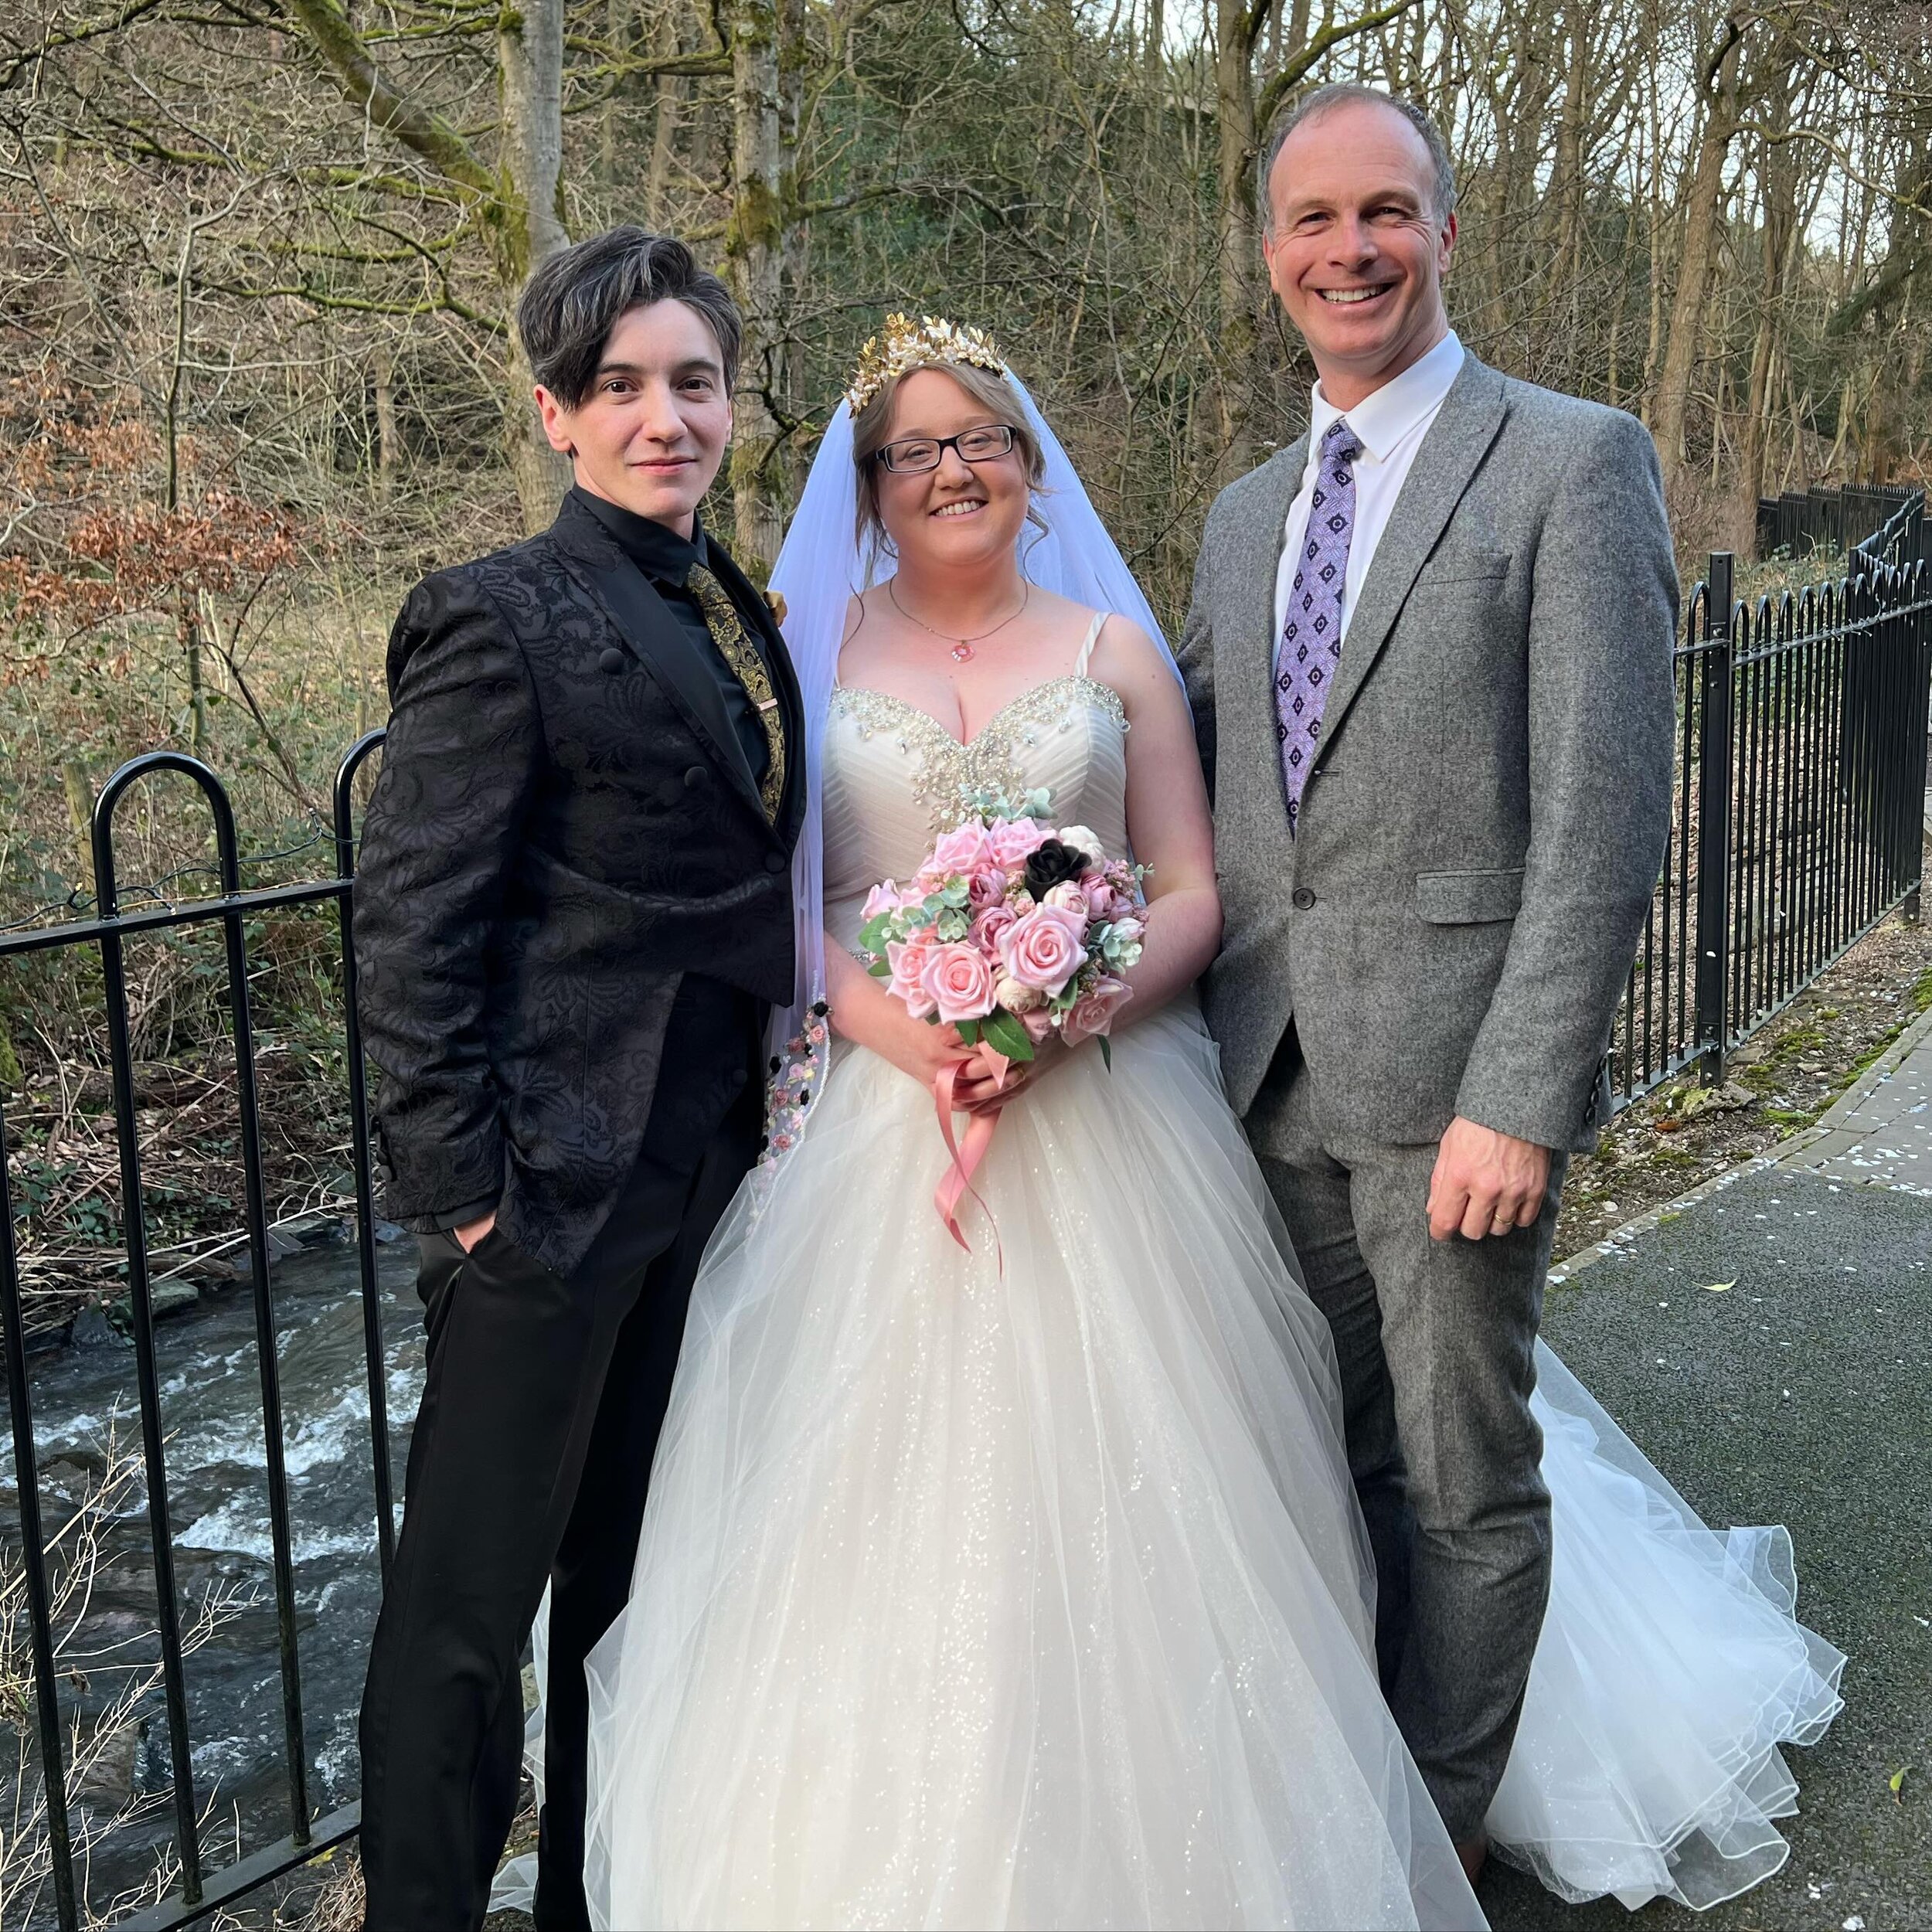 Congratulations to the new Mr &amp; Mrs Harman who had their beautiful &amp; personal wedding ceremony at the end of January. Thank you for kicking off my 2024 wedding season in style!

Thank you to Jordan @woodmanthunderbridge for looking after me &